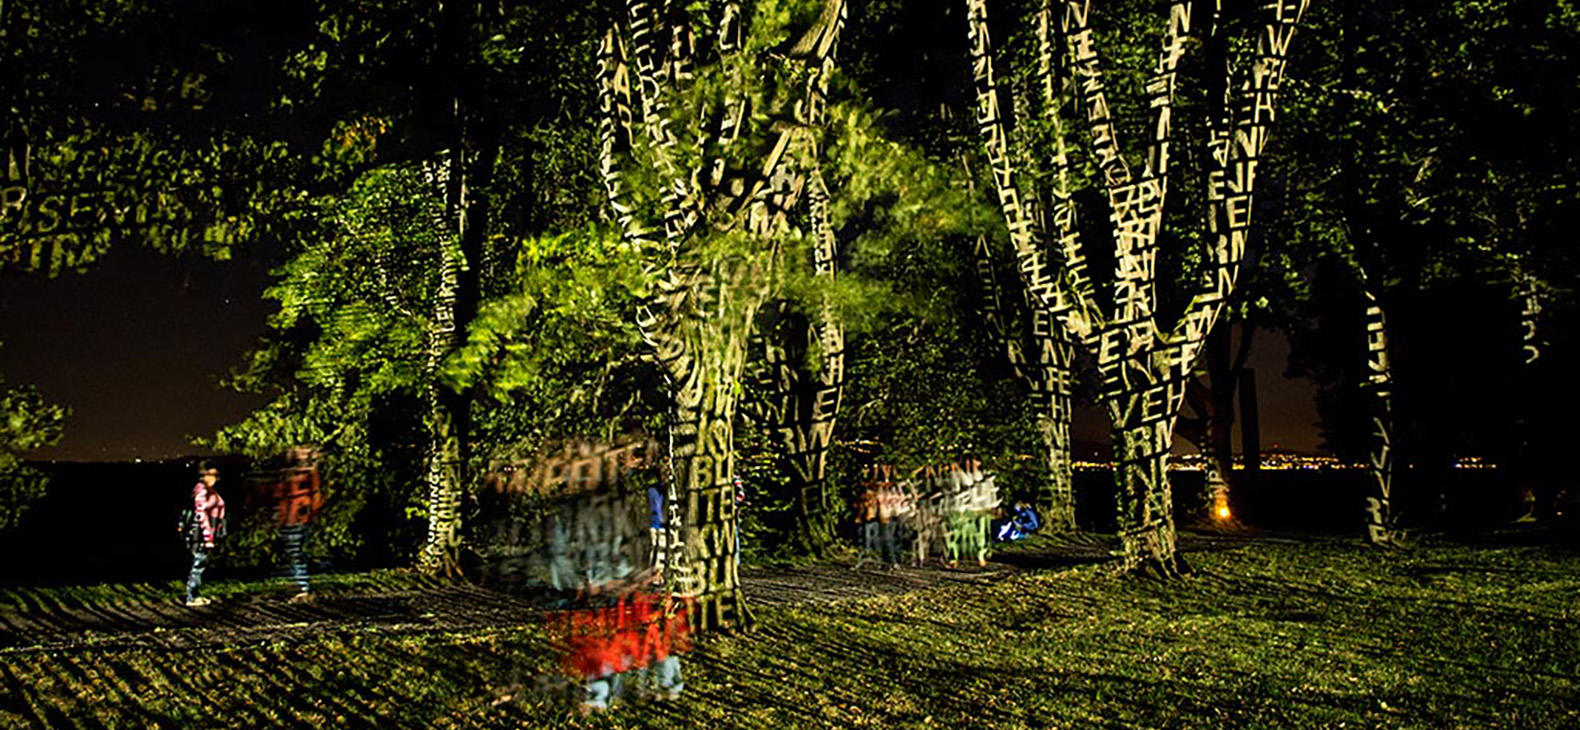 Hartung | Trenz: Parkgeschehen, Lindenhofpark in Lindau, 2015; Image: Nocturnal light projections of letters on trees and ground with visitors - color atmosphere: strong contrasts, yellow-green with red and blue color spots